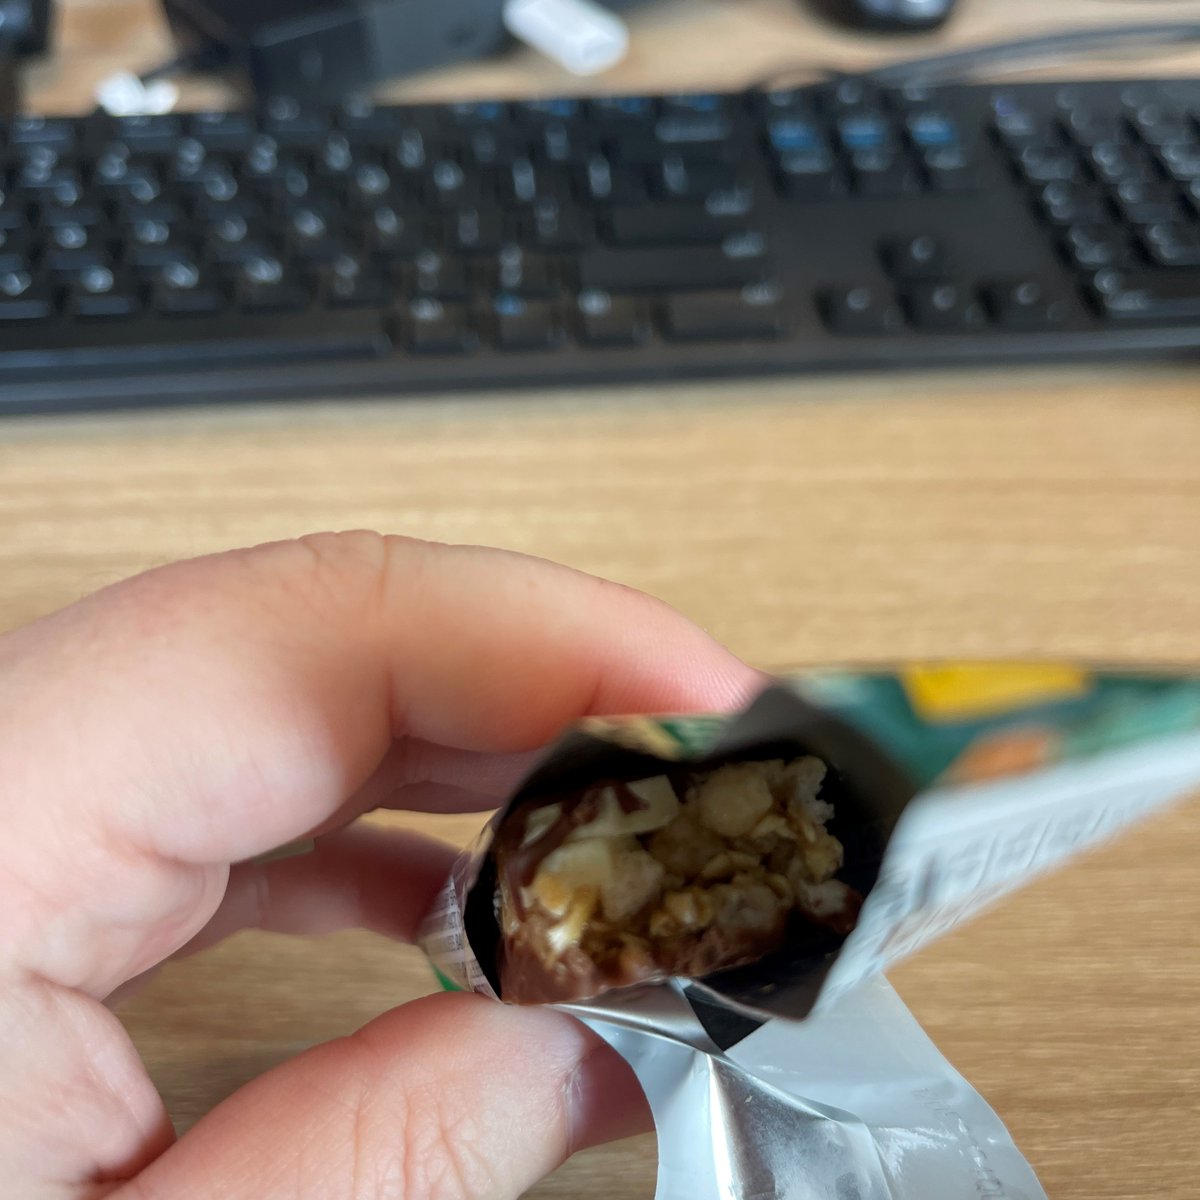 Hey! @NatureValley Why does this brand new granola bar look like it has a bite taken out of it already???? I just opened it and it looks like someone already bit into it